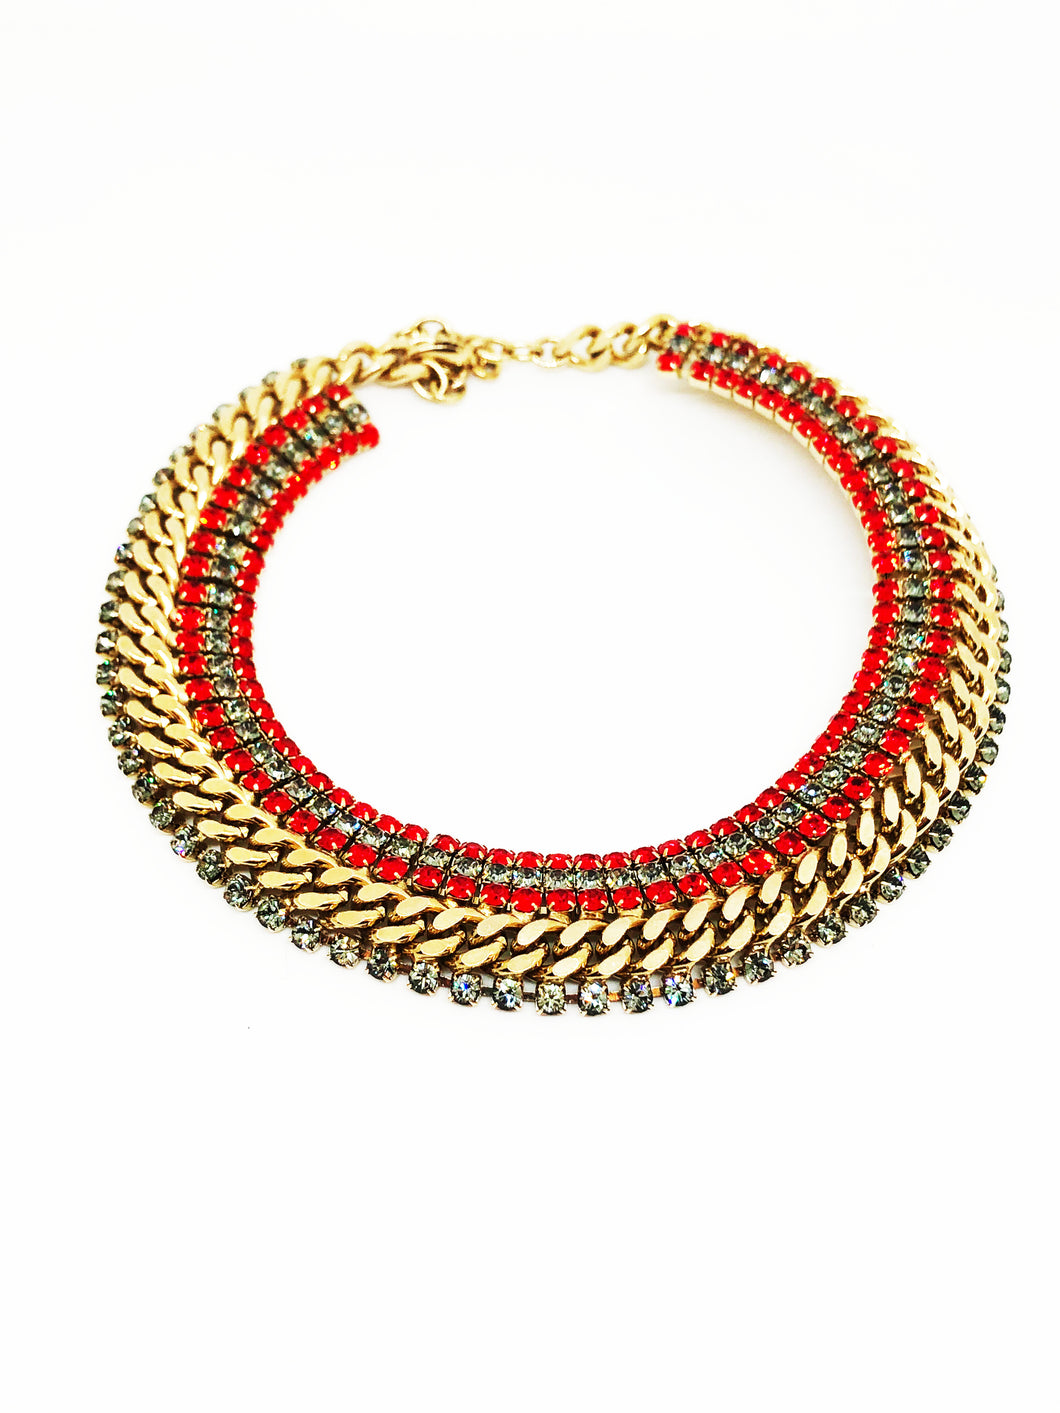 RED AND GOLD NECKLACE